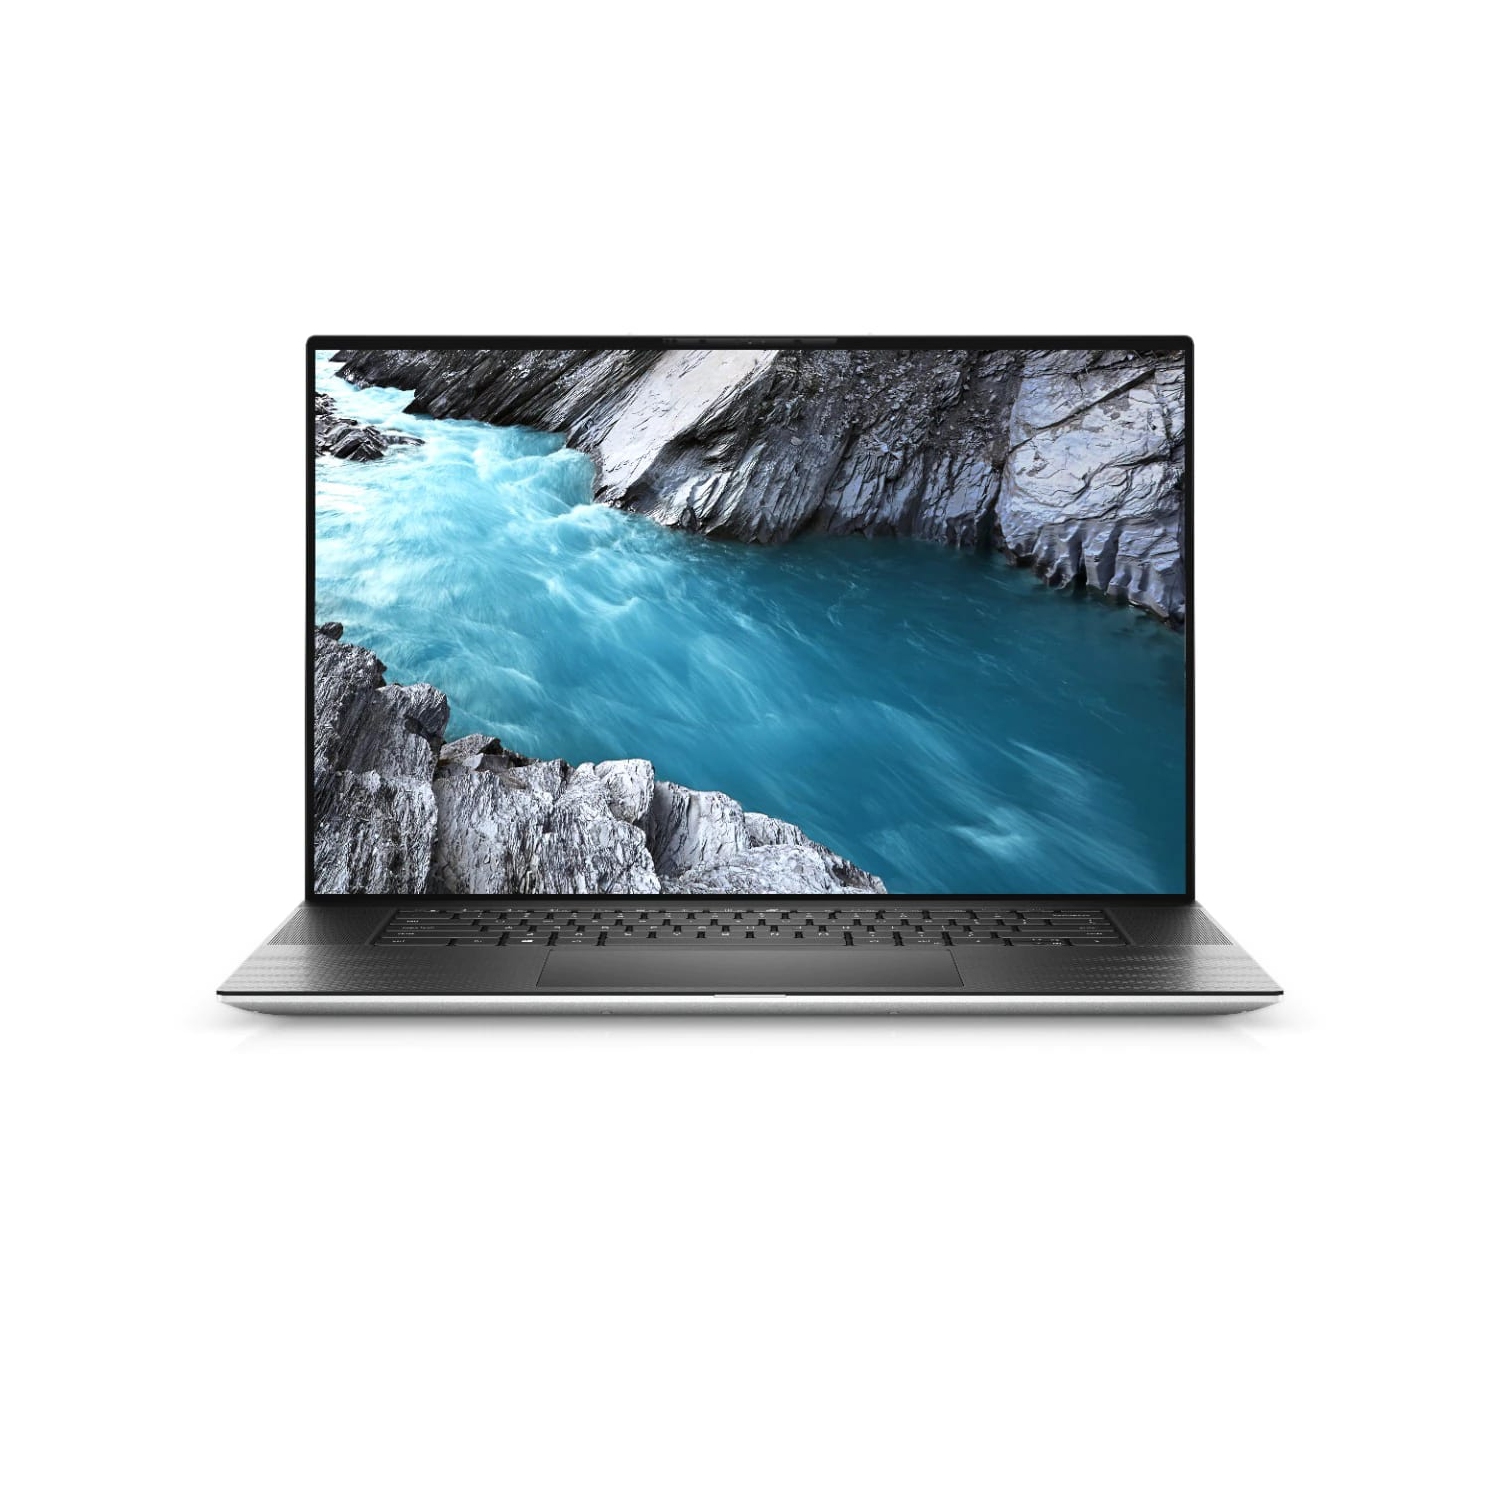 Refurbished (Excellent) - Dell XPS 17 9700 Laptop (2020), 17" FHD+, Core i7, 1TB SSD + 1TB SSD, 64GB RAM, RTX 2060, 8 Cores @ 5.1 GHz, 10th Gen CPU Certified Refurbished